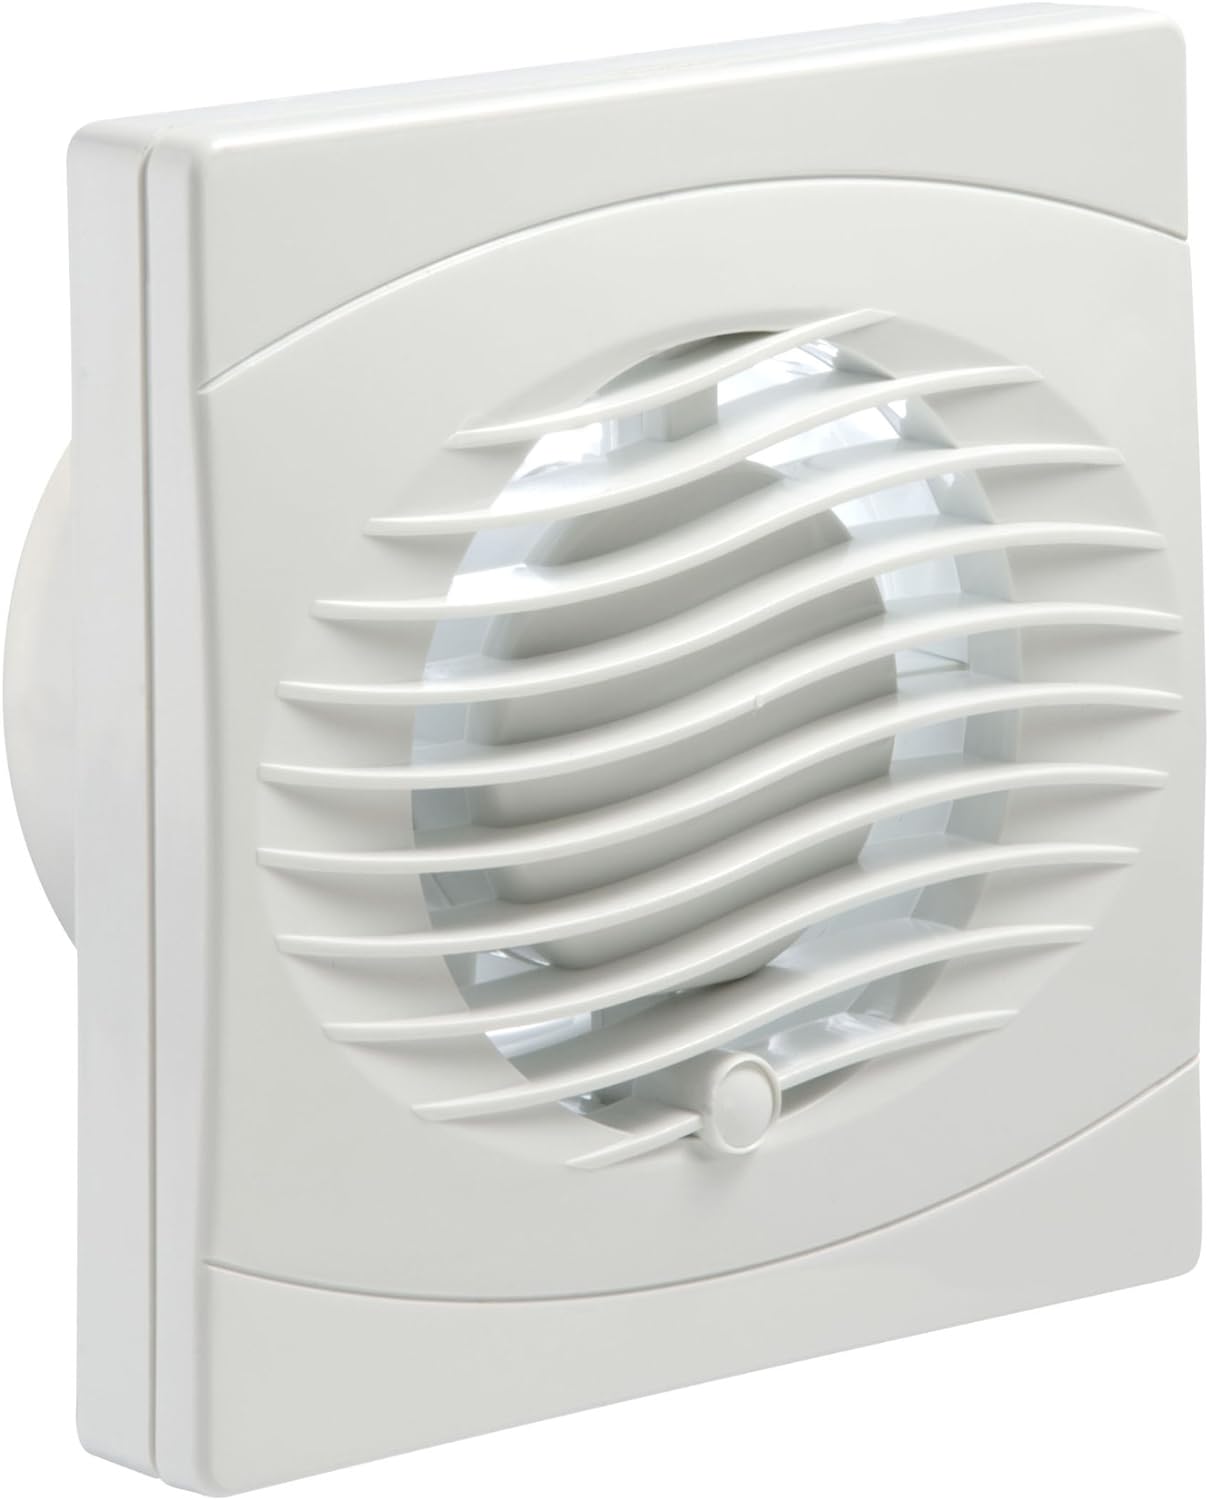 Manrose Extractor Fan With Timer BVF150T - 6 Inch/150 Mm